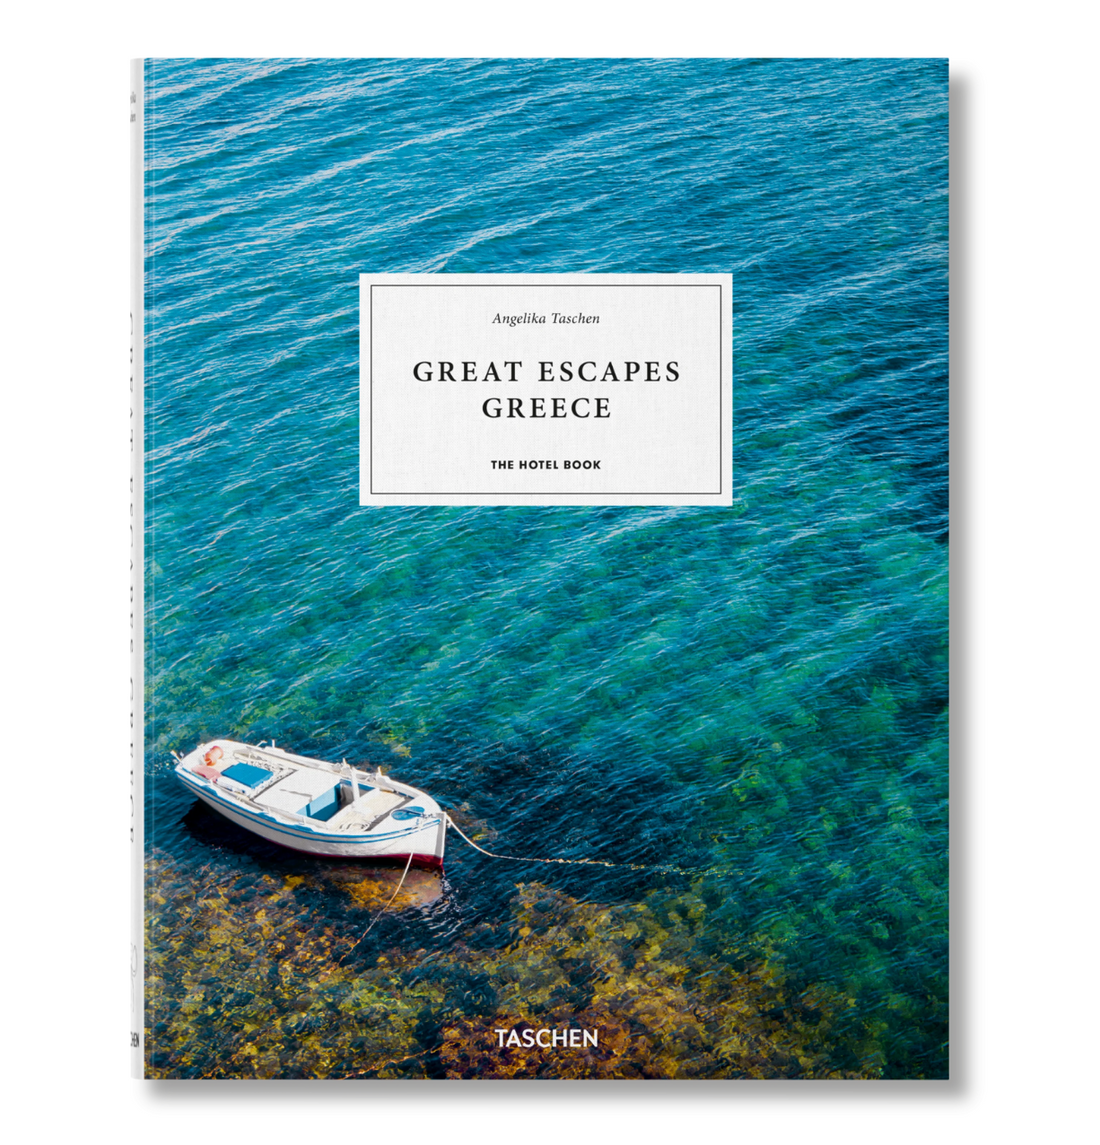 Taschen - Great Escapes Greece. The Hotel Book